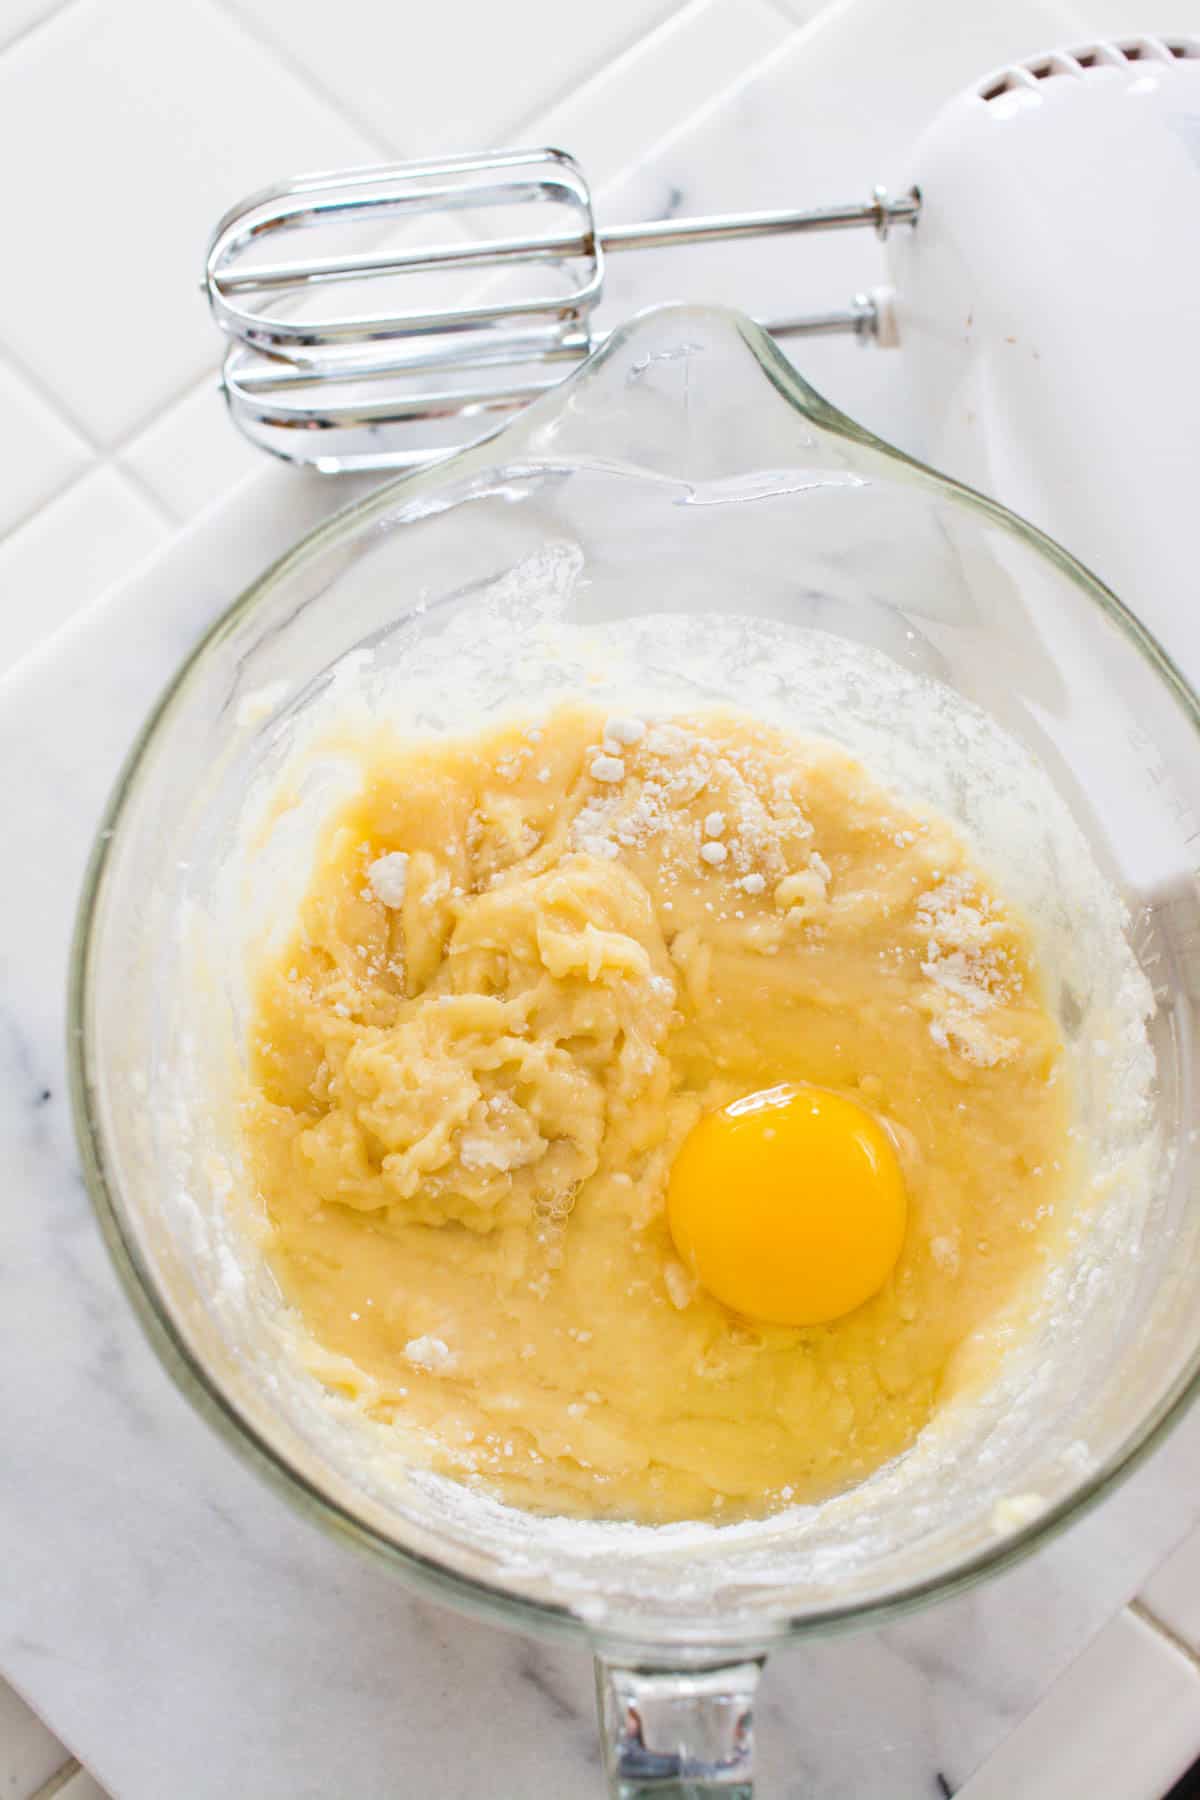 A glass bowl with cake batter and an egg.